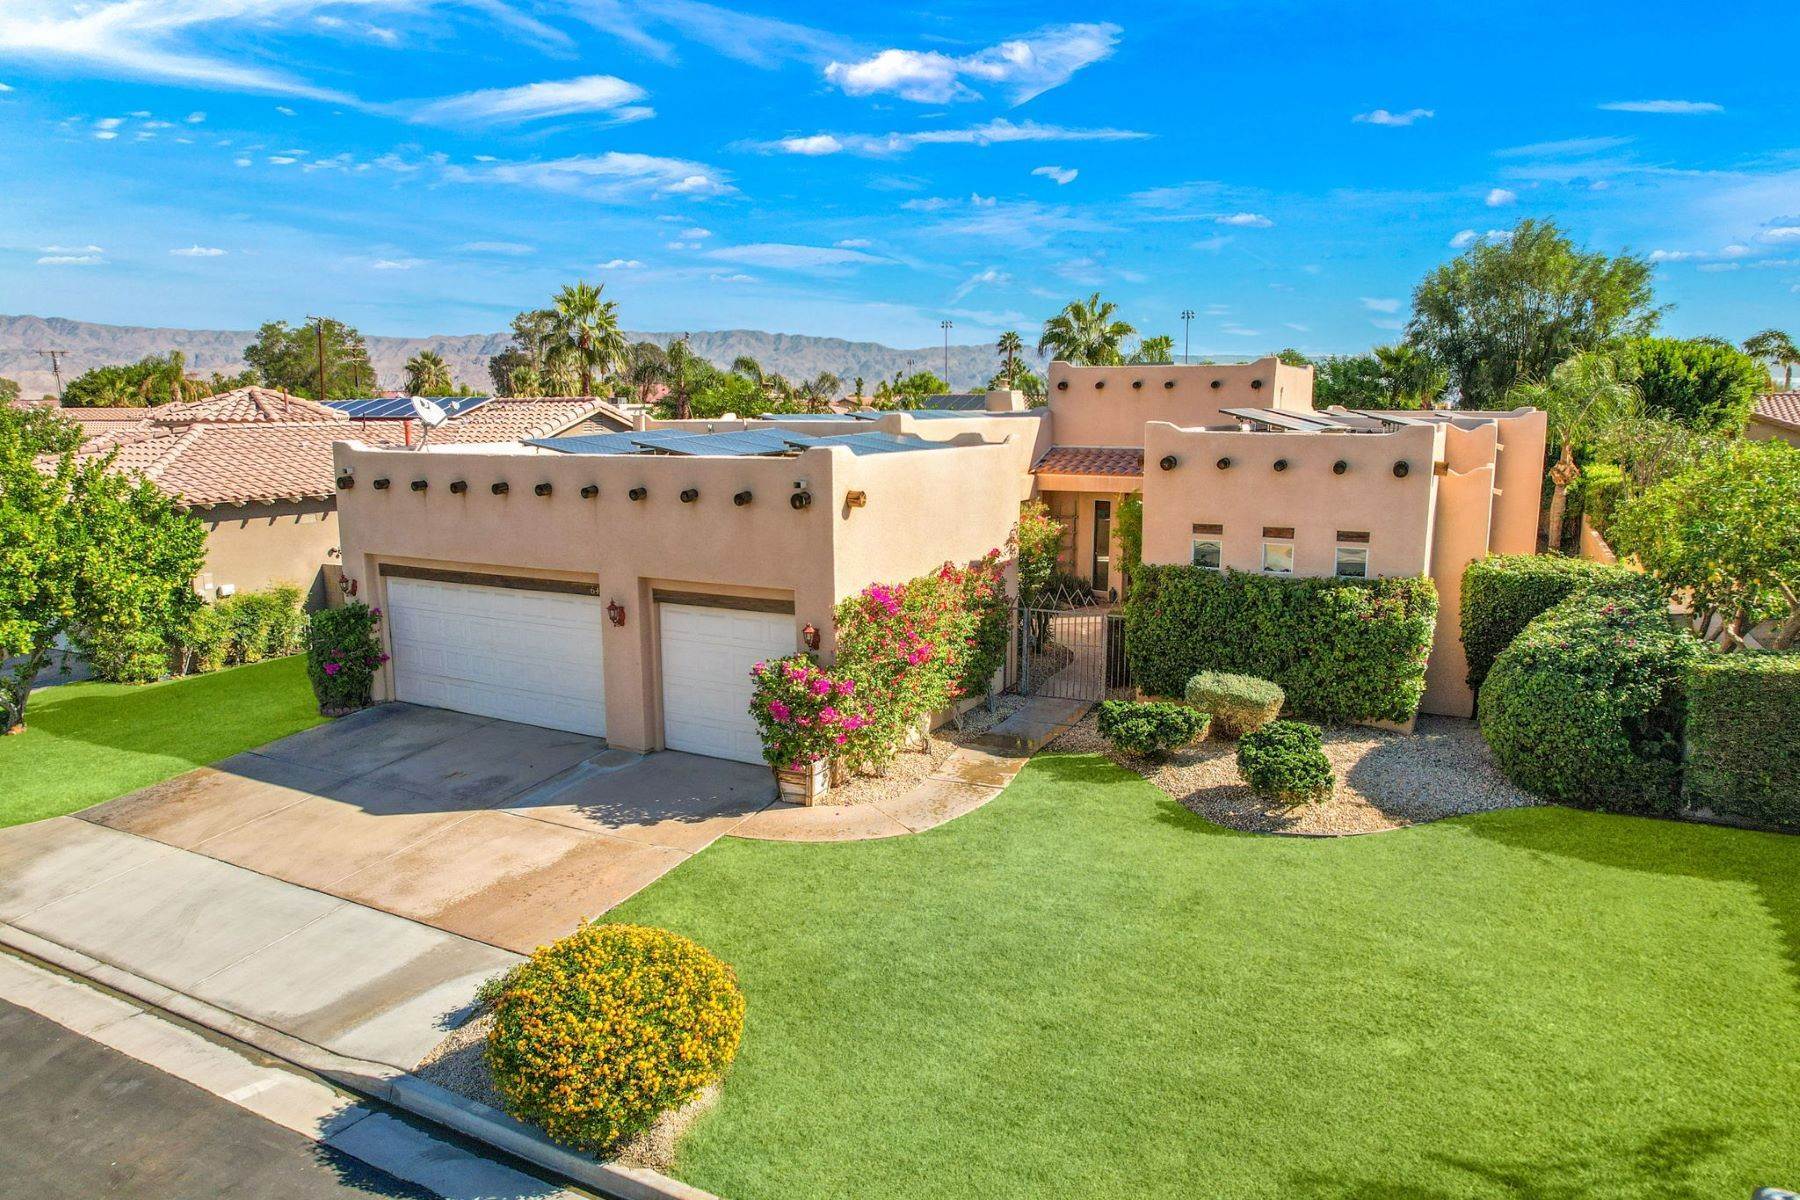 Single Family Homes for Sale at Southwest-Inspired Four Bedroom Home in Gated Tucson Subdivision 64 Tempe Trail Palm Desert, California 92211 United States